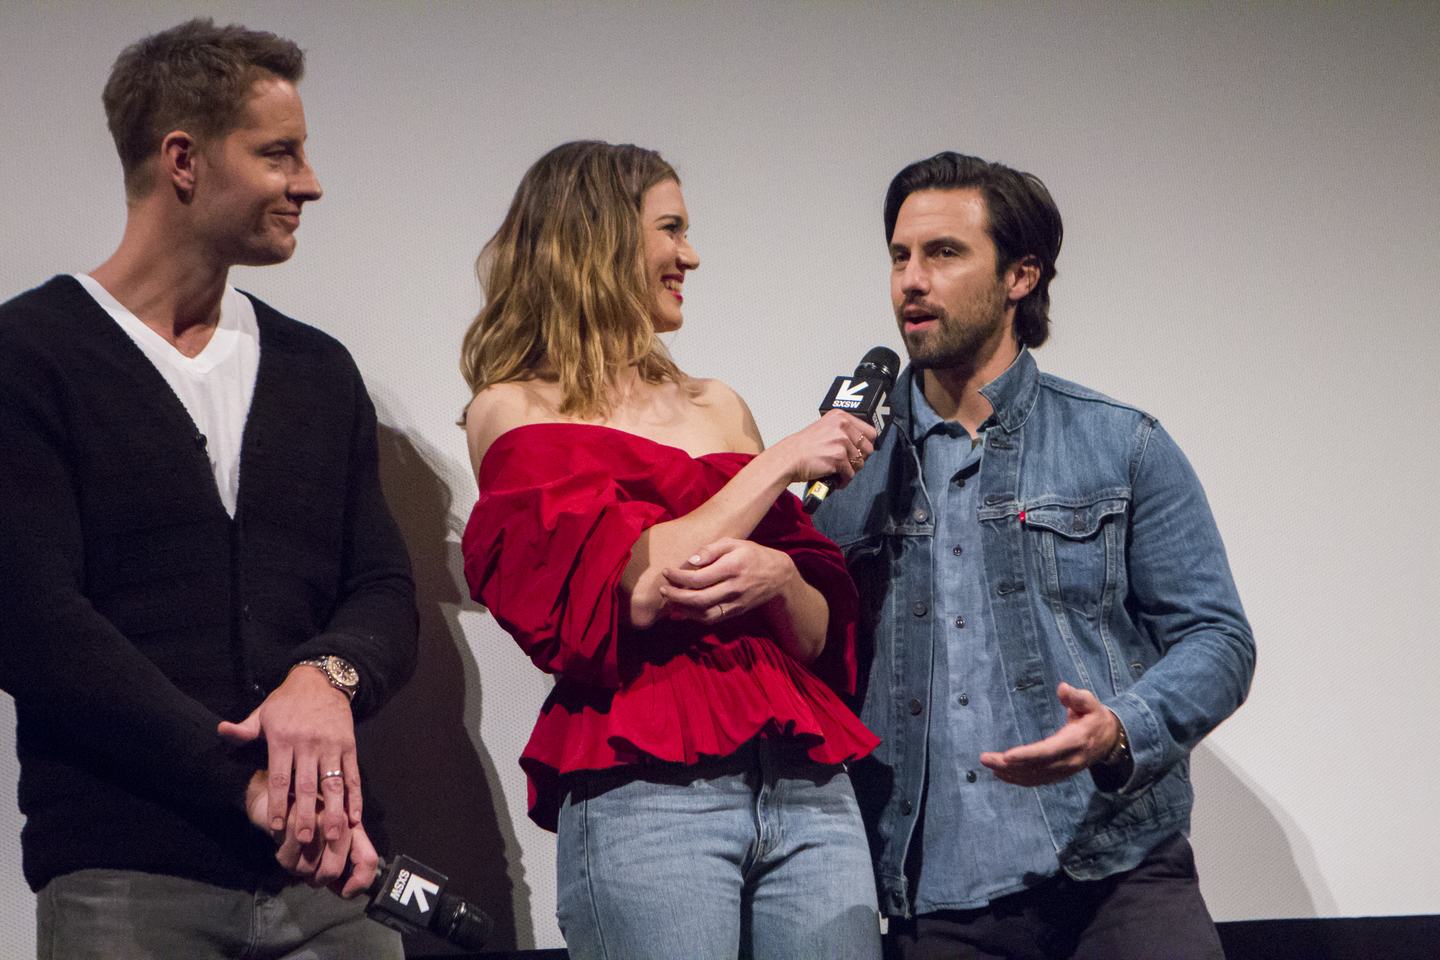 Justin Hartley, Mandy Moore and Milo Ventimilgia at the This is Us Season 2 Finale Episode Premiere. Photo by Adrianne Schroeder